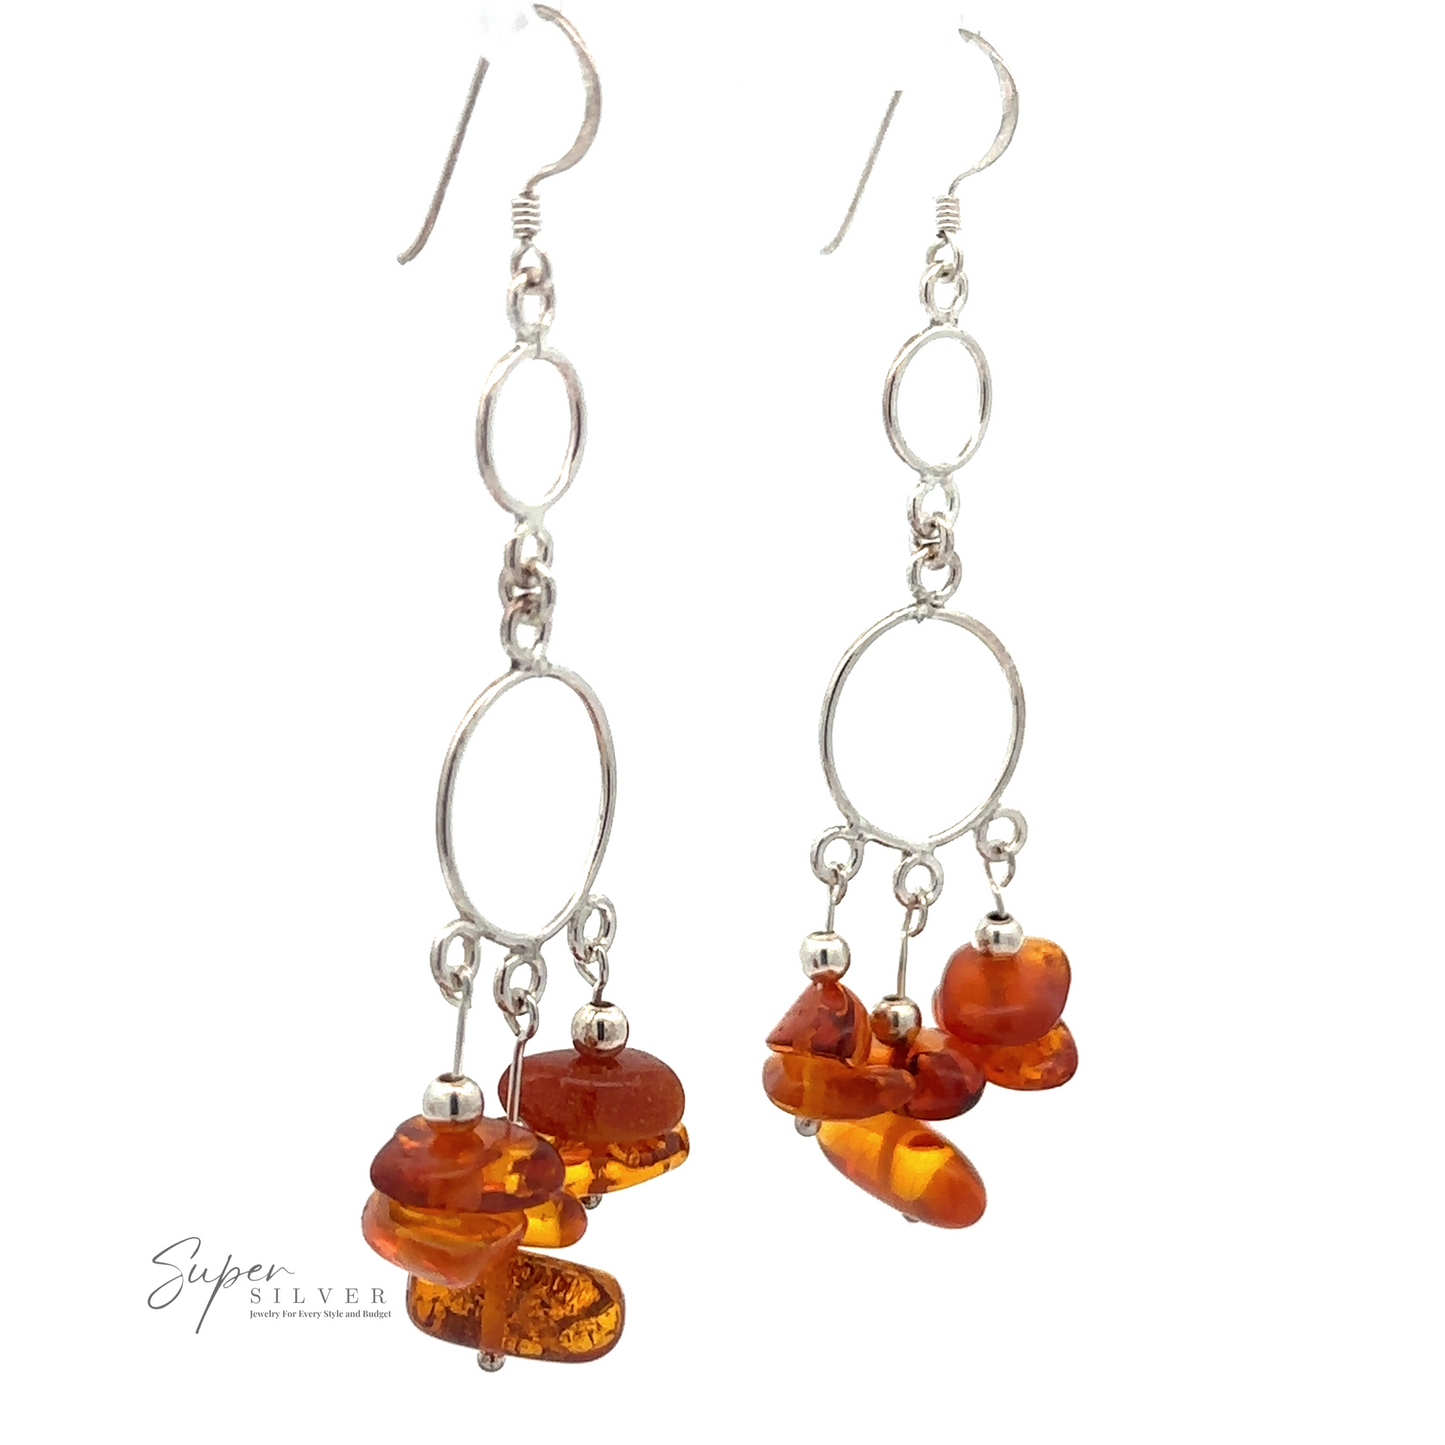 A pair of Hoop Dangle Earrings with Amber featuring Baltic amber stones and oval loops. The Hoop Dangle Earrings with Amber have dangling amber clusters at the bottom. Logo "Super Silver" appears in the lower left corner.